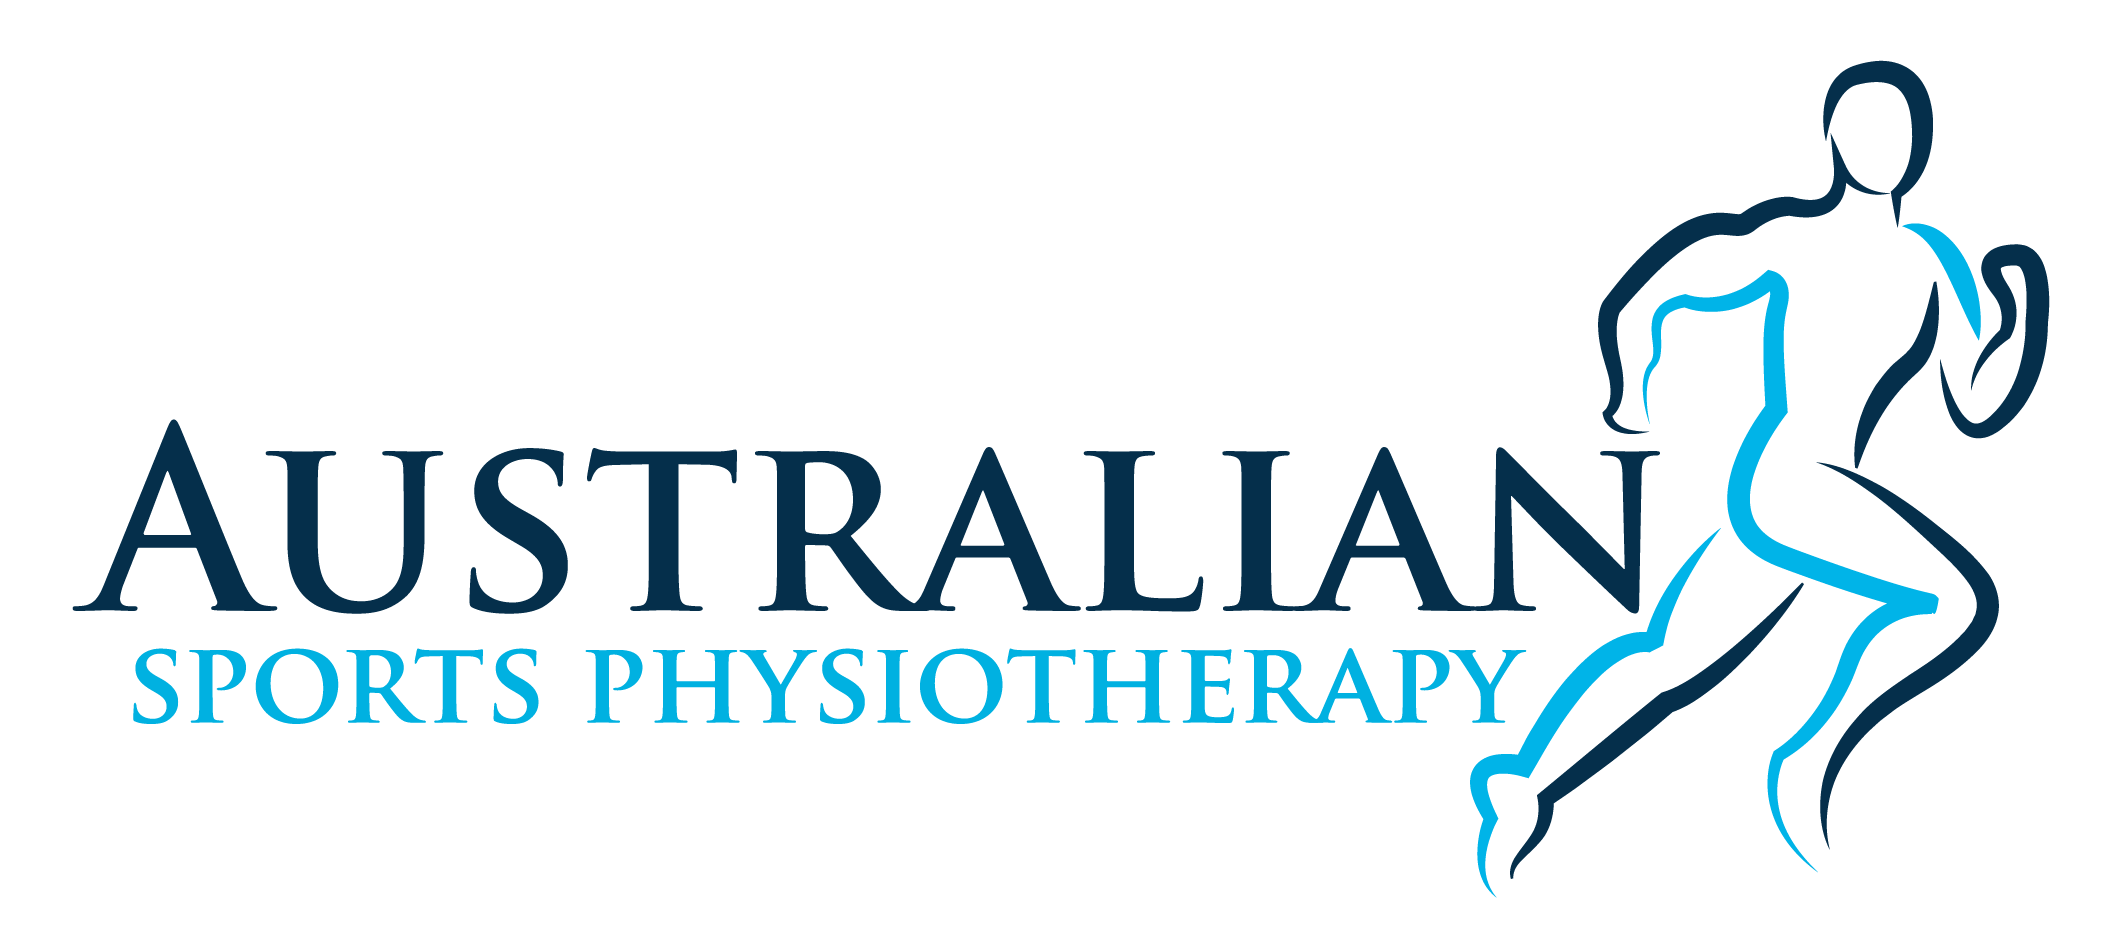 Australian Sports Physiotherapy